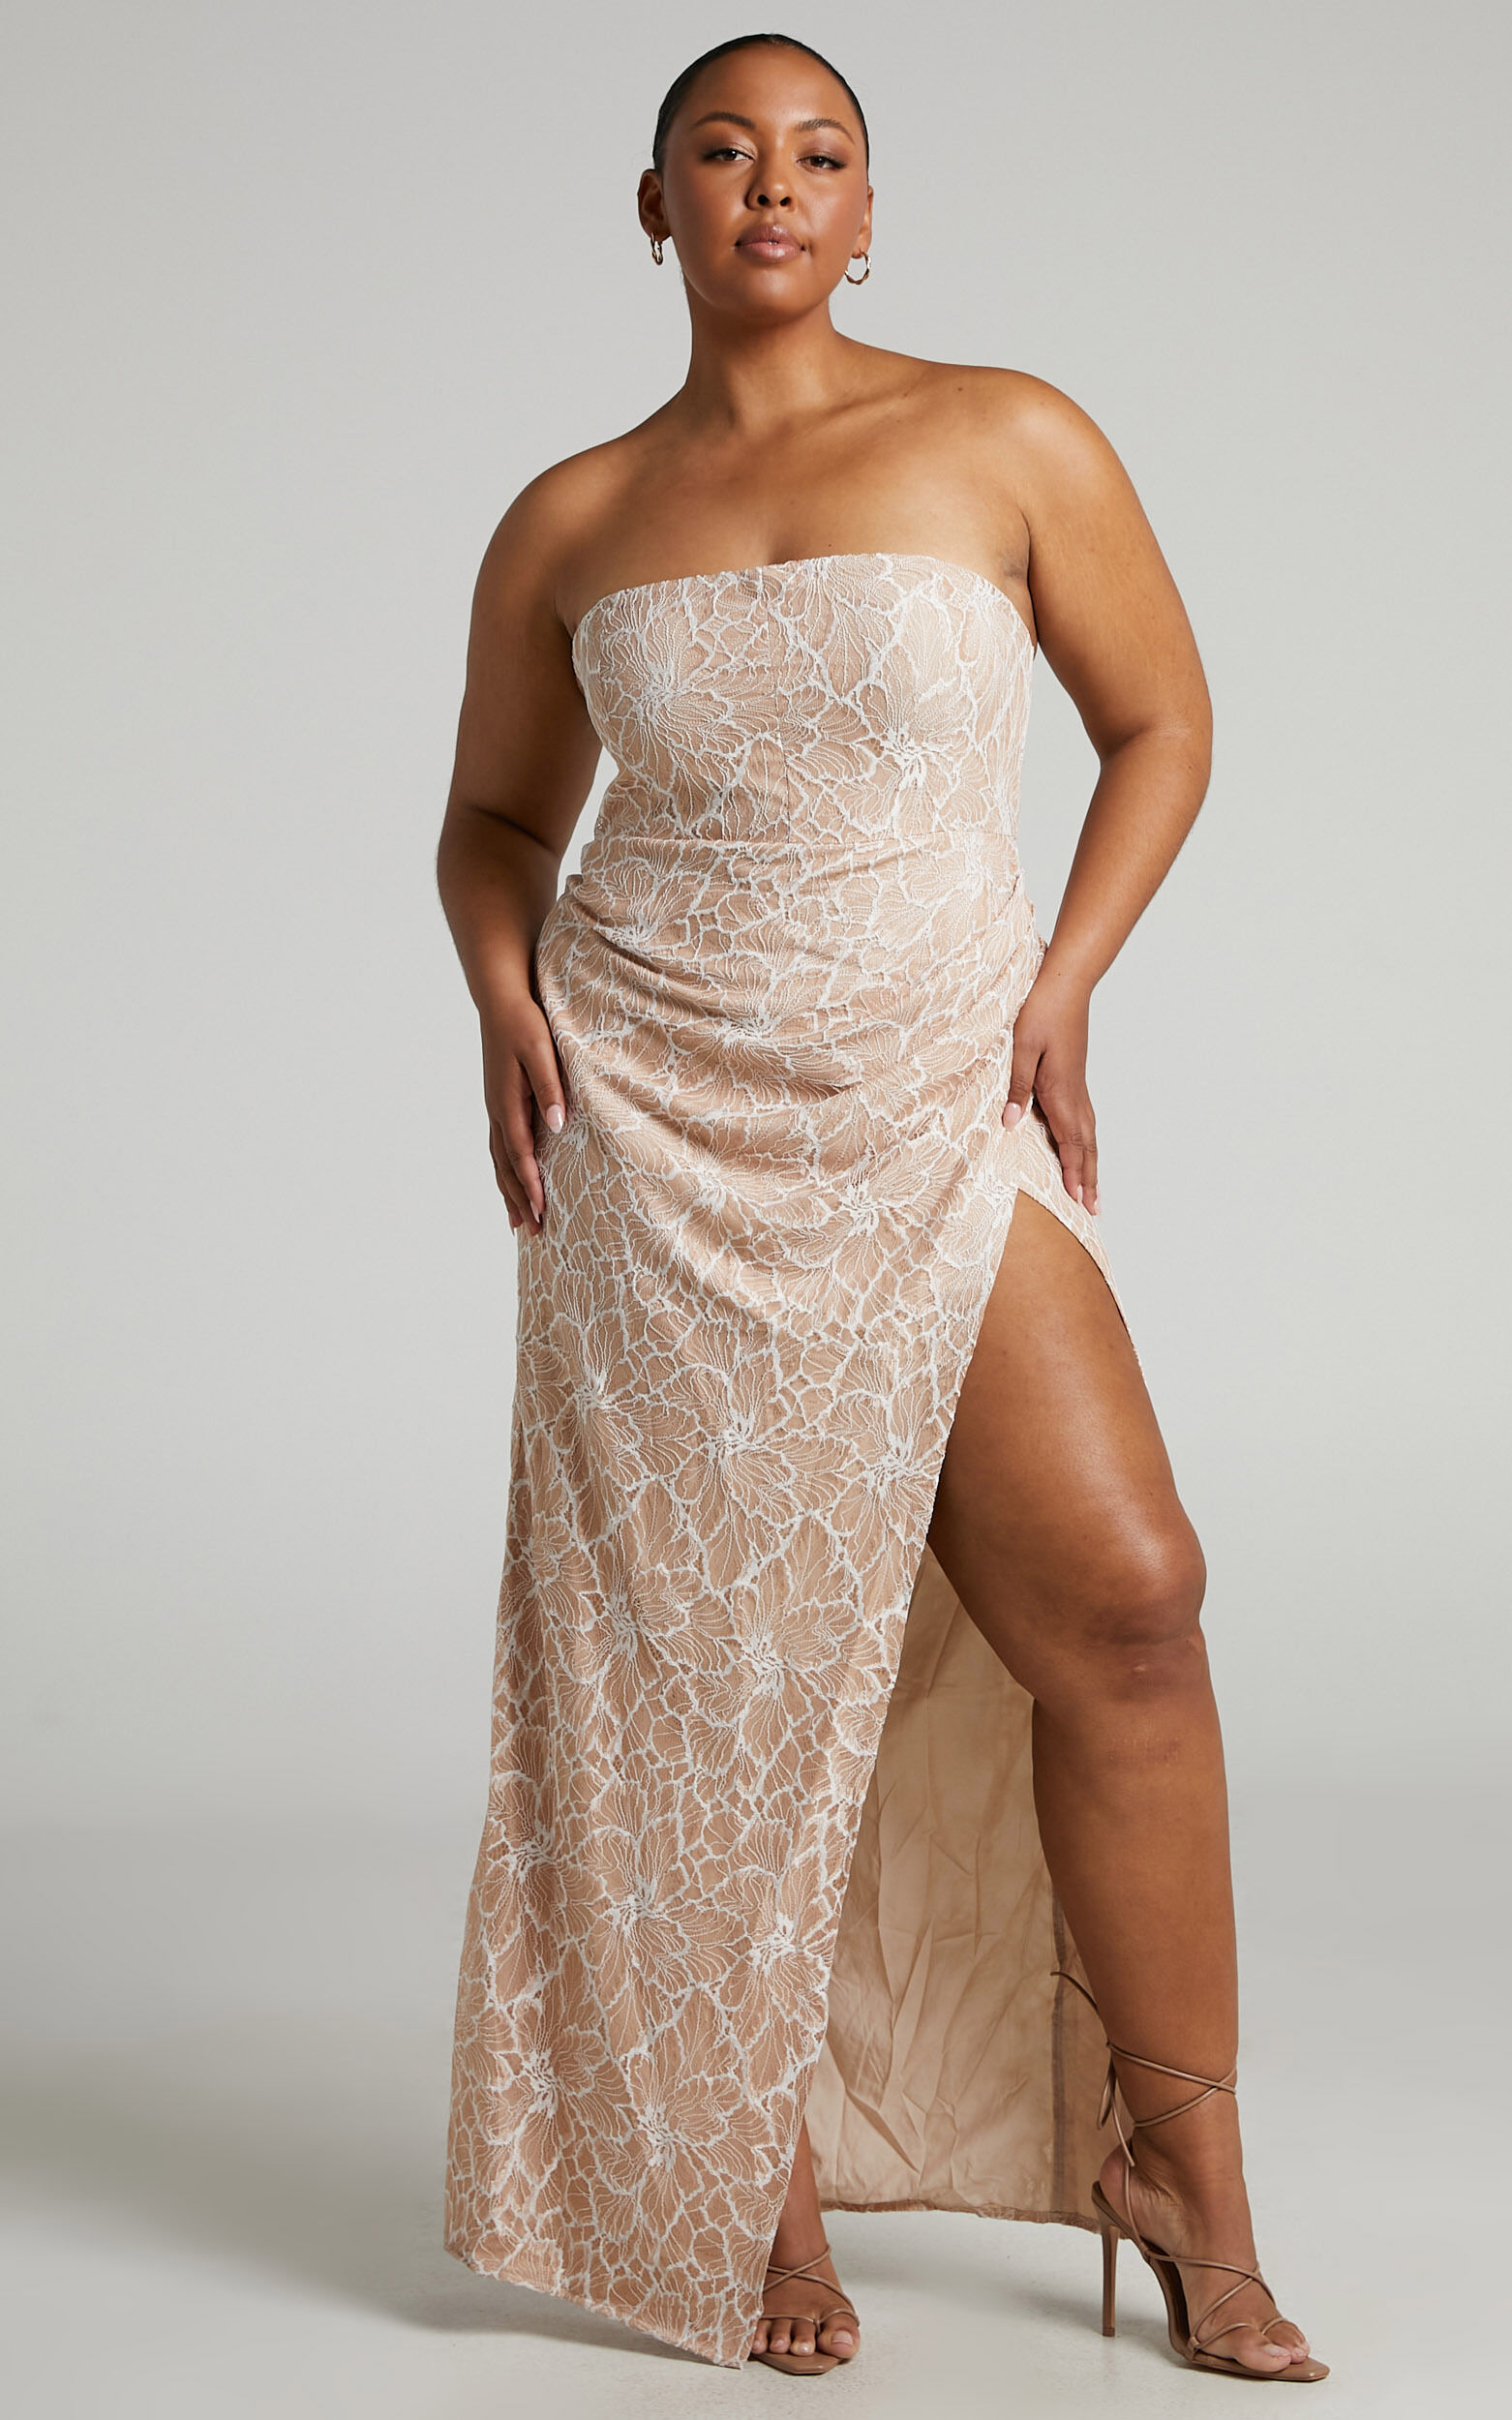 Lucinda Strapless High Split Maxi Dress in Beige and White Lace - 04, BRN1, super-hi-res image number null